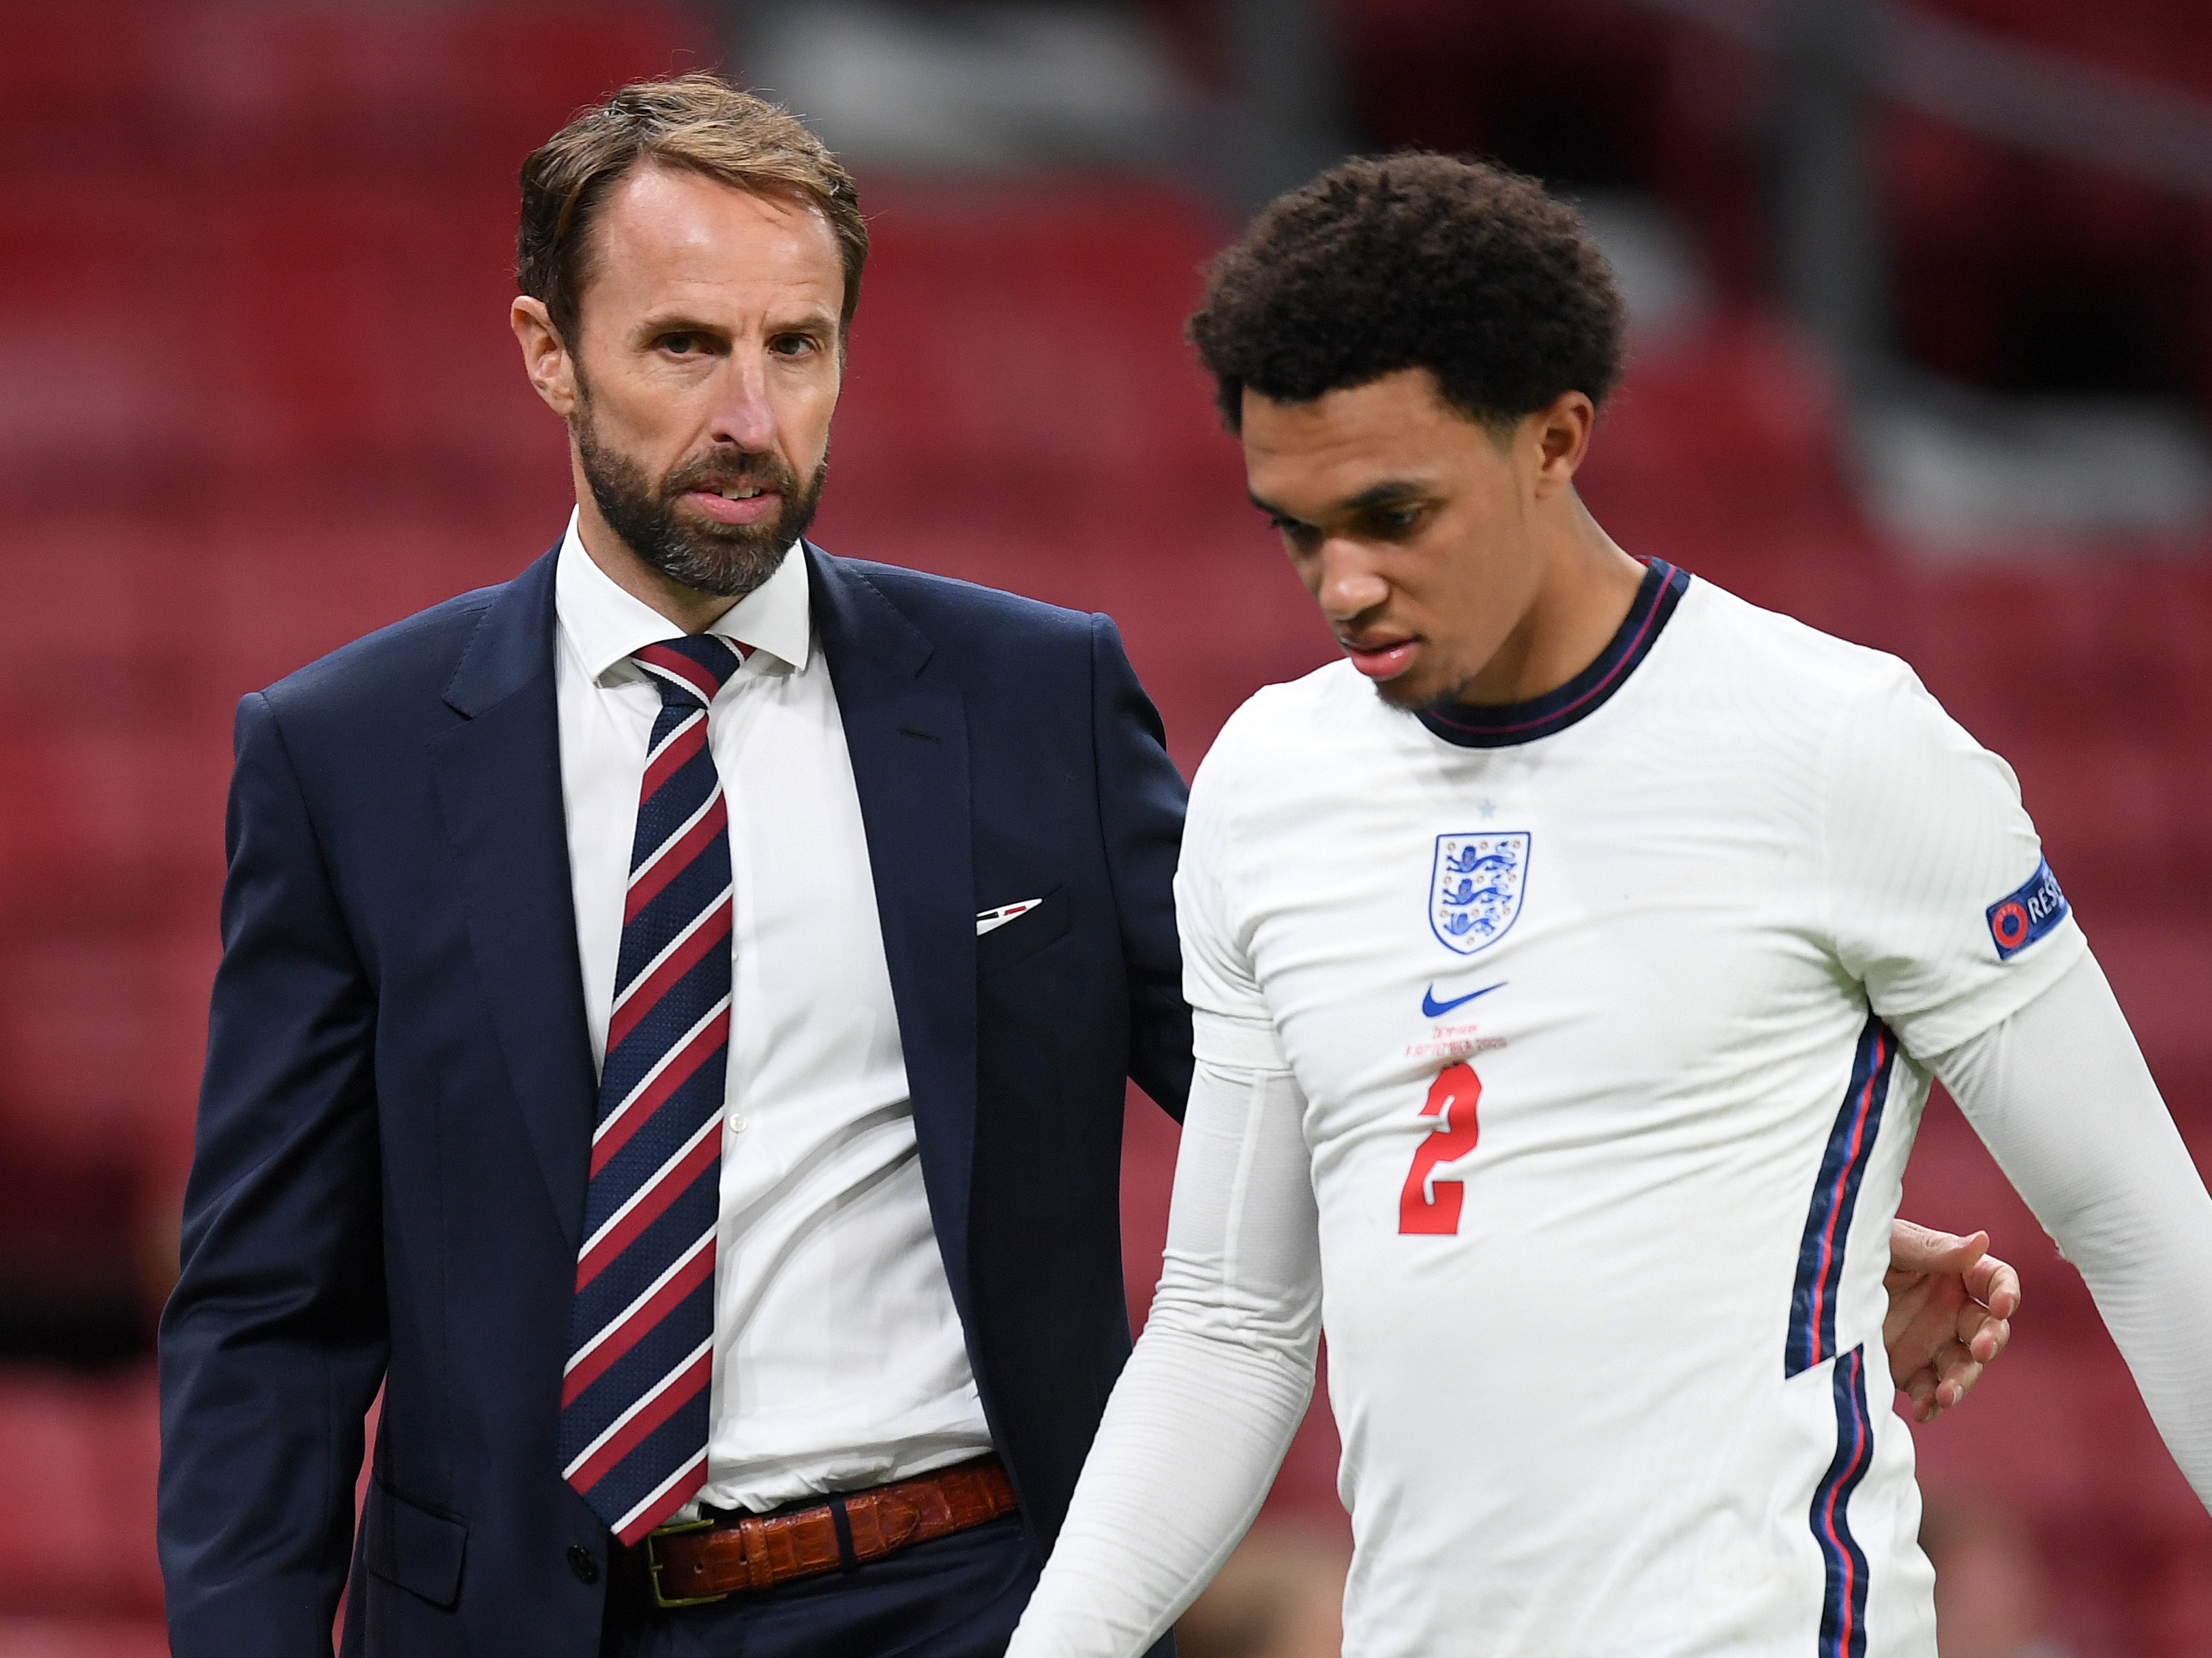 Trent Alexander-Arnold was left out of Gareth Southgate’s England squad this week